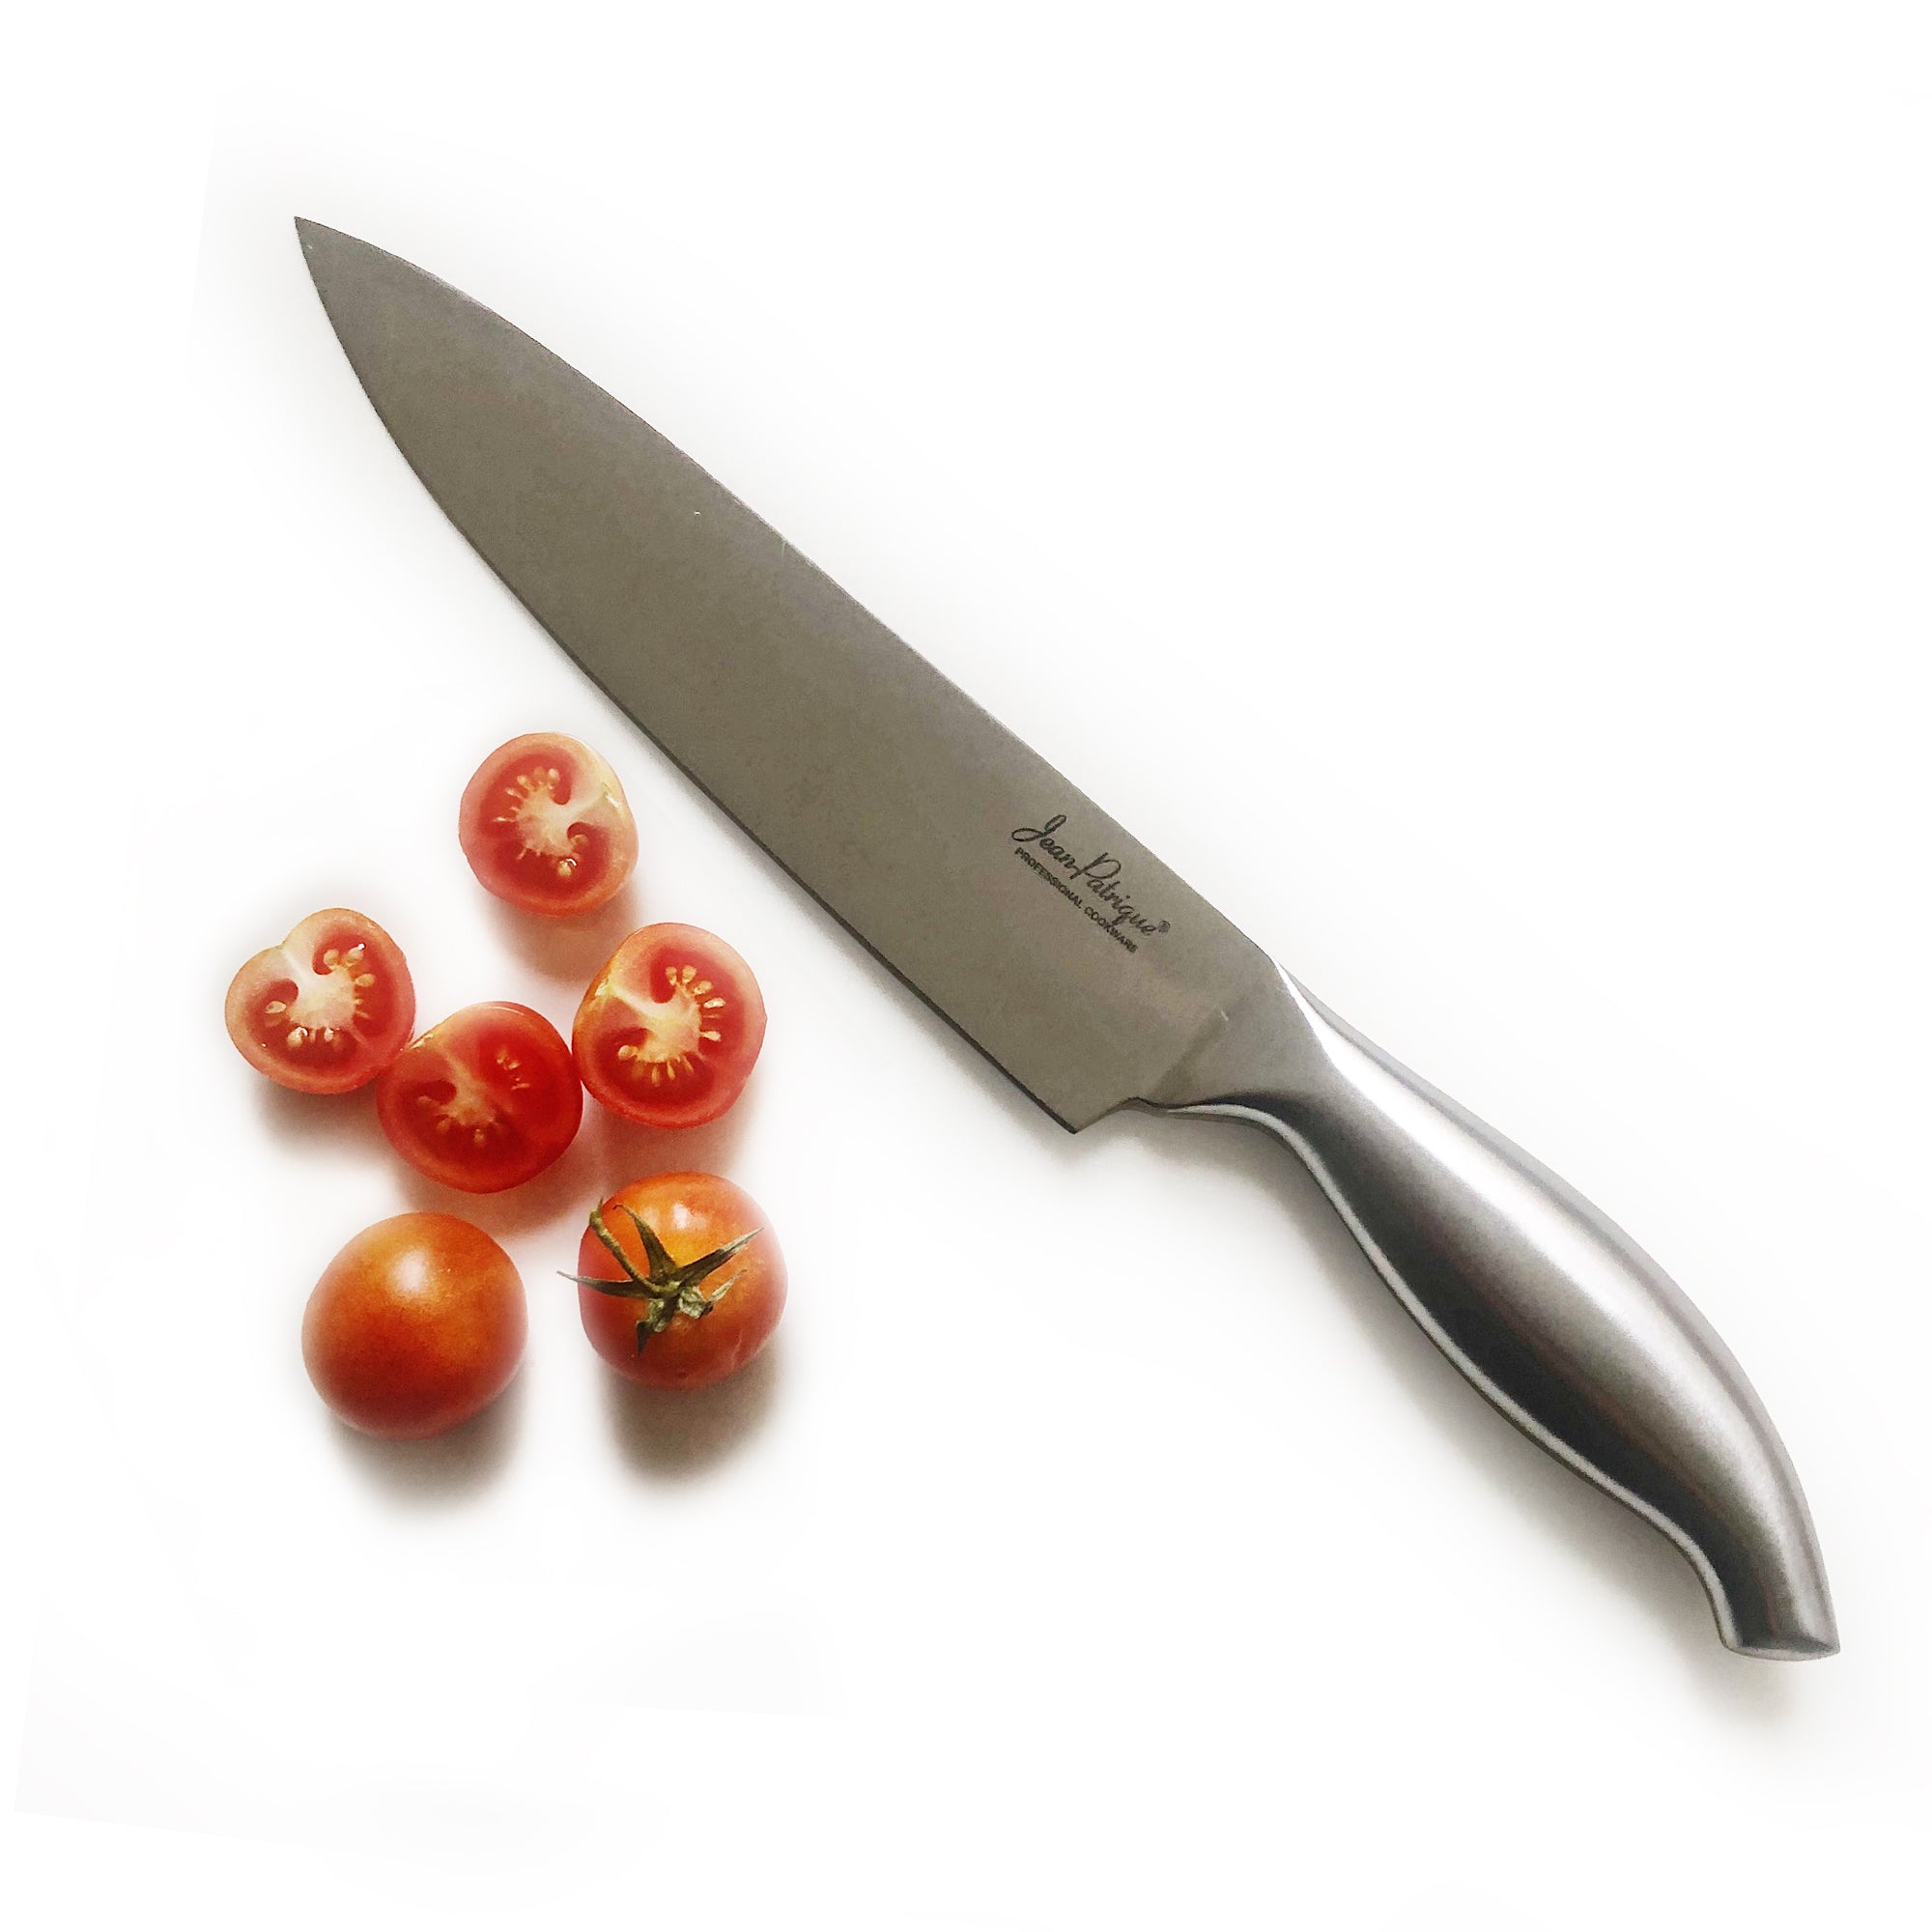 Chef Knife 8 inch Professional Kitchen Knives Stainless Steel